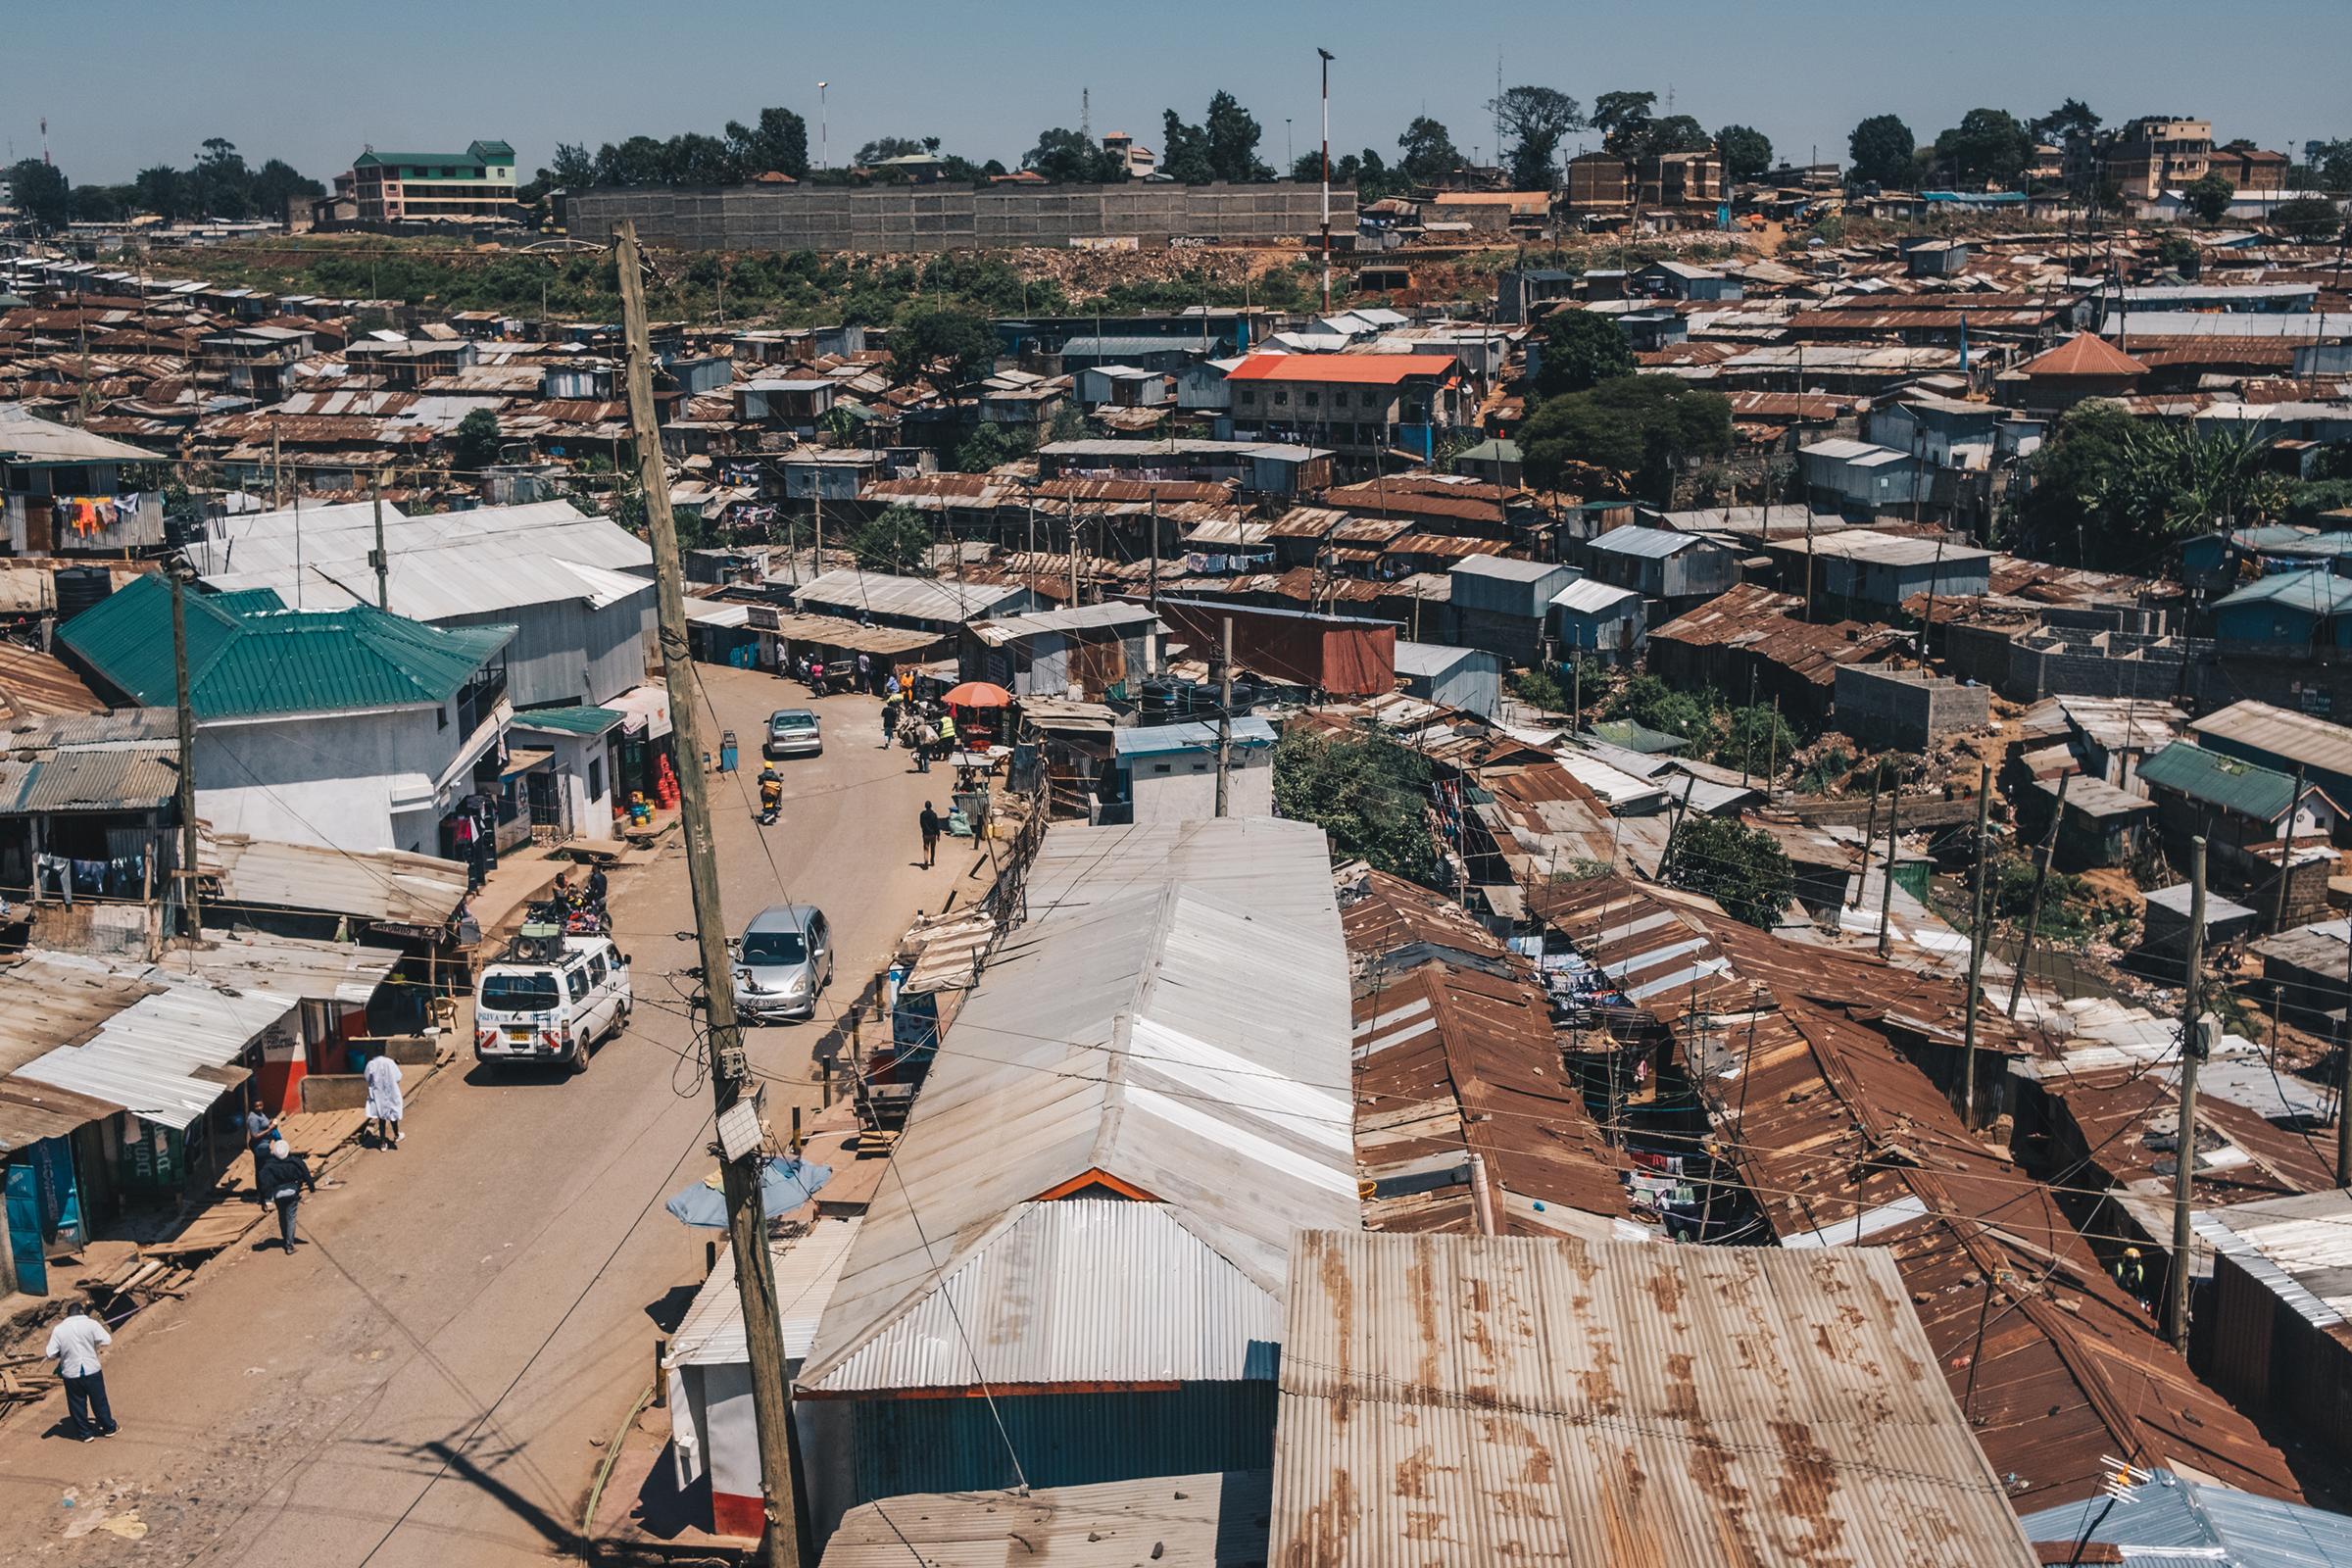 Kibera, the largest informal settlement in Africa, out of which Sama says many of its workers are hired. (Khadija Farah for TIME.)